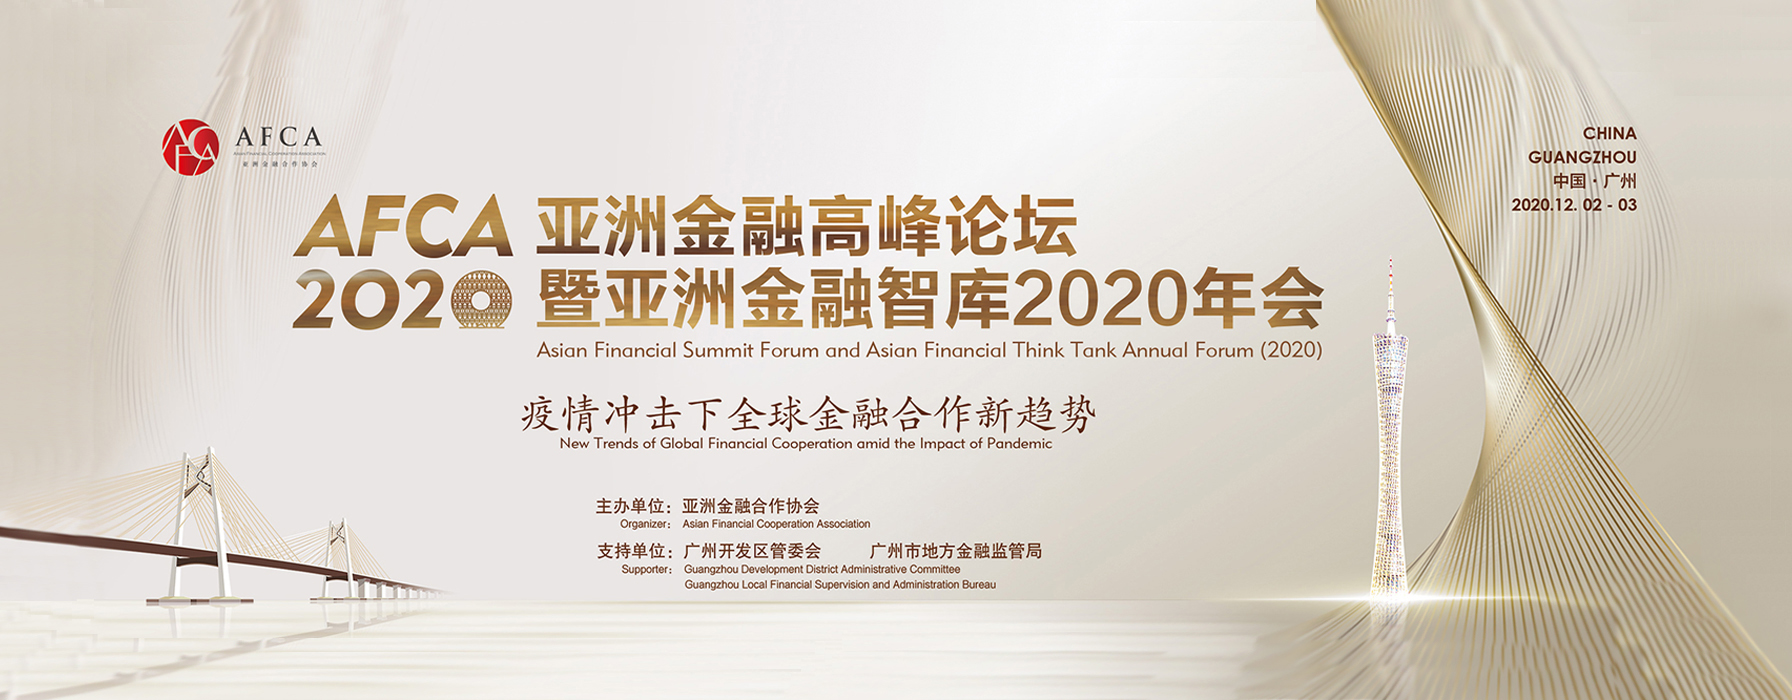 Asian Financial Summit Forum and Asian Financial Think Tank Annual Forum（2020）